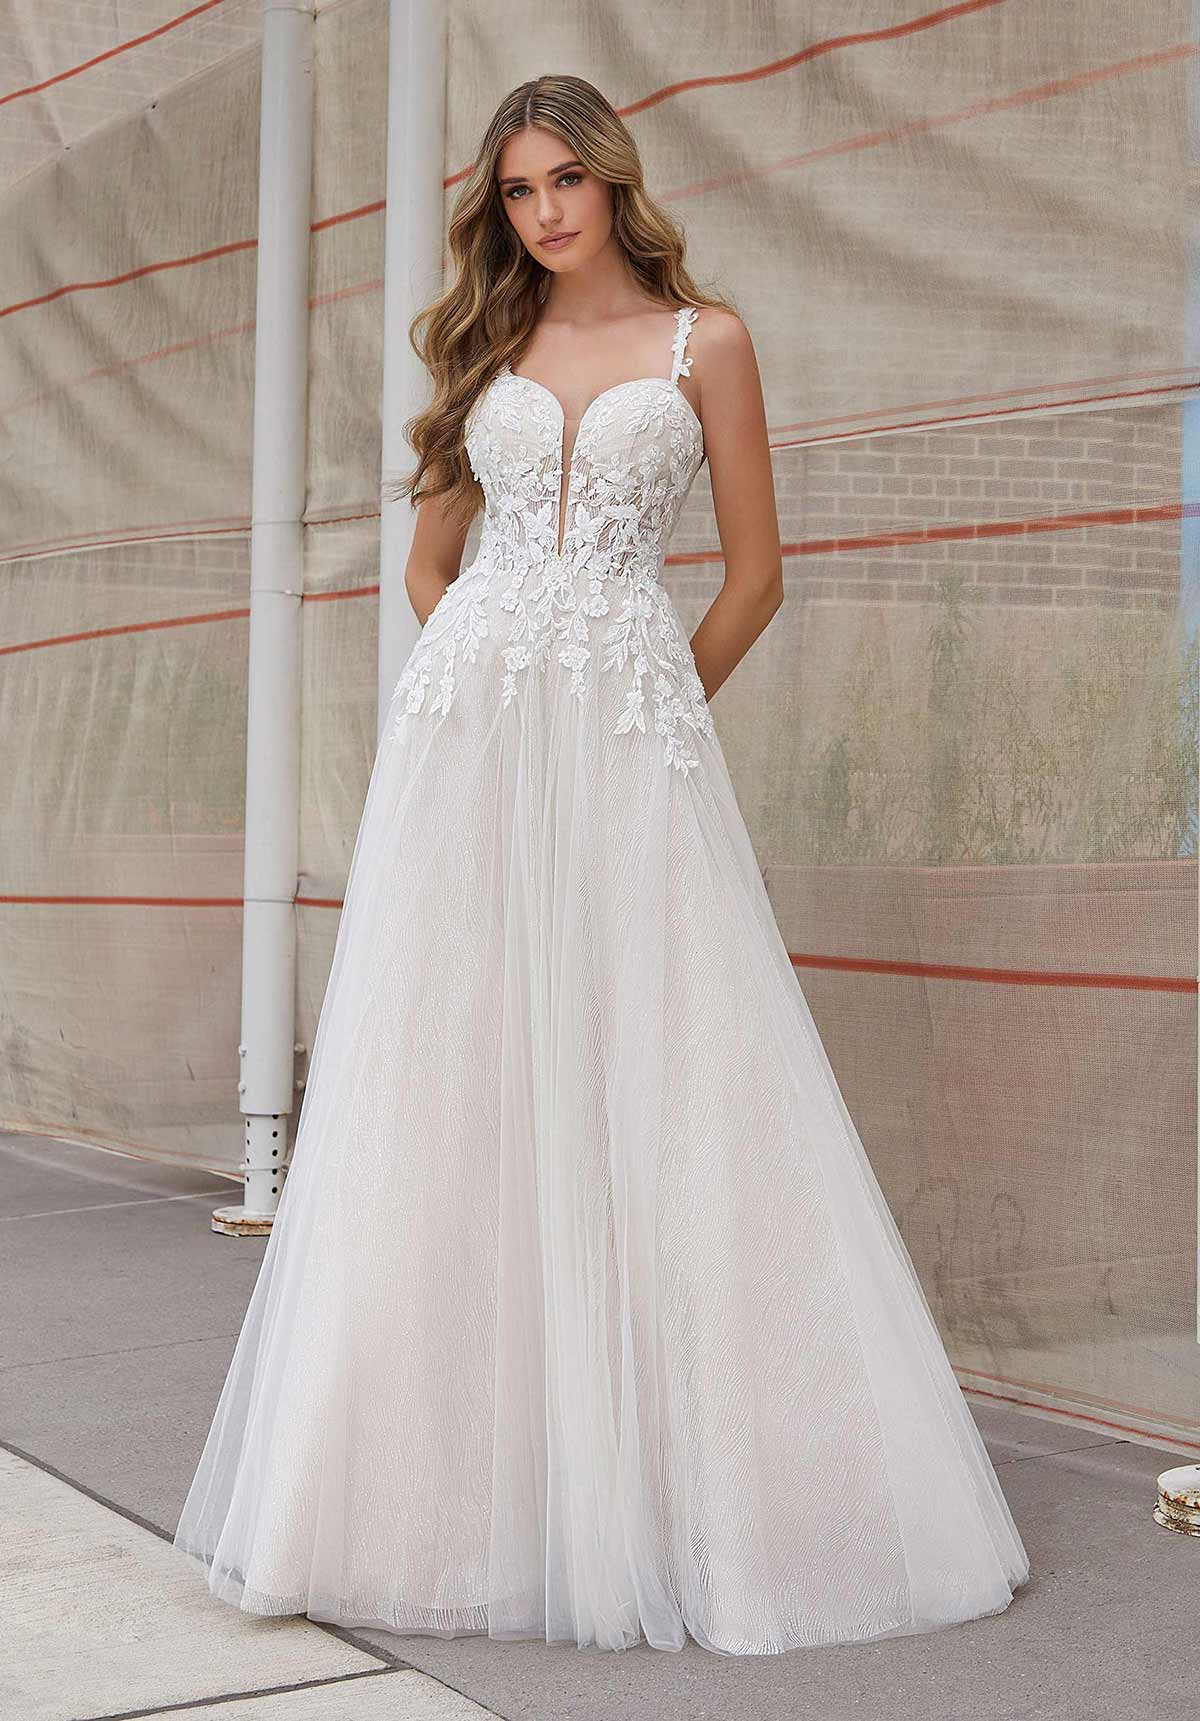 Blu - 4118 - Jacinta - Cheron's Bridal, Wedding Gown - Morilee Blu - - Wedding Gowns Dresses Chattanooga Hixson Shops Boutiques Tennessee TN Georgia GA MSRP Lowest Prices Sale Discount